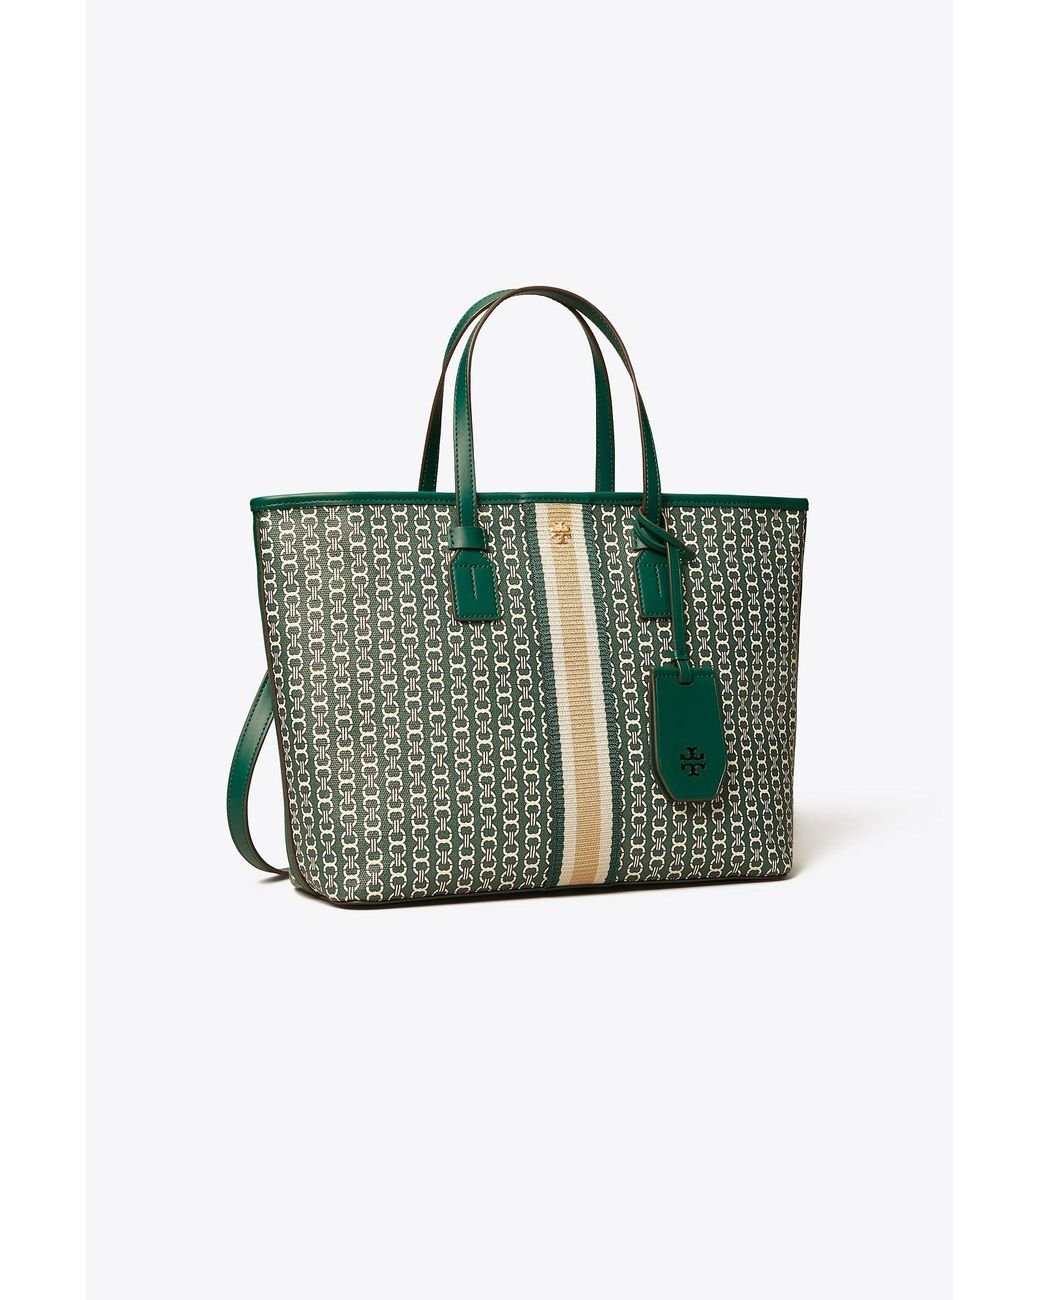 Tory Burch Green Coated Canvas Small Gemini Link Tote Tory Burch